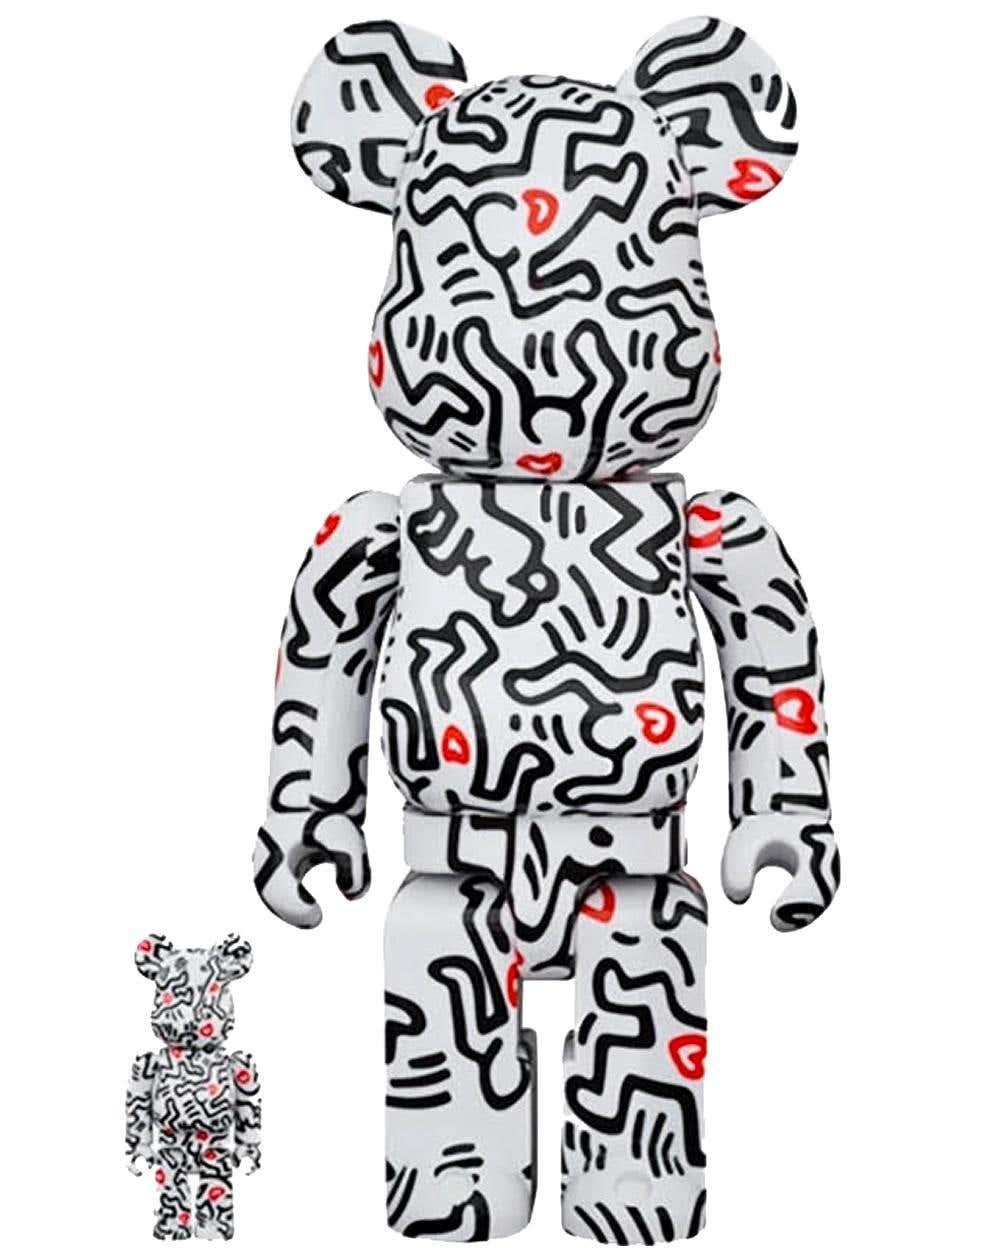 Jean Michel Basquiat Andy Warhol Keith Haring Bearbrick 400%: set of 6 individual works:
A set of 6 unique, timeless pop art collectibles trademarked & licensed by the estates of Jean Michel Basquiat, Andy Warhol, and Keith Haring. The partnered